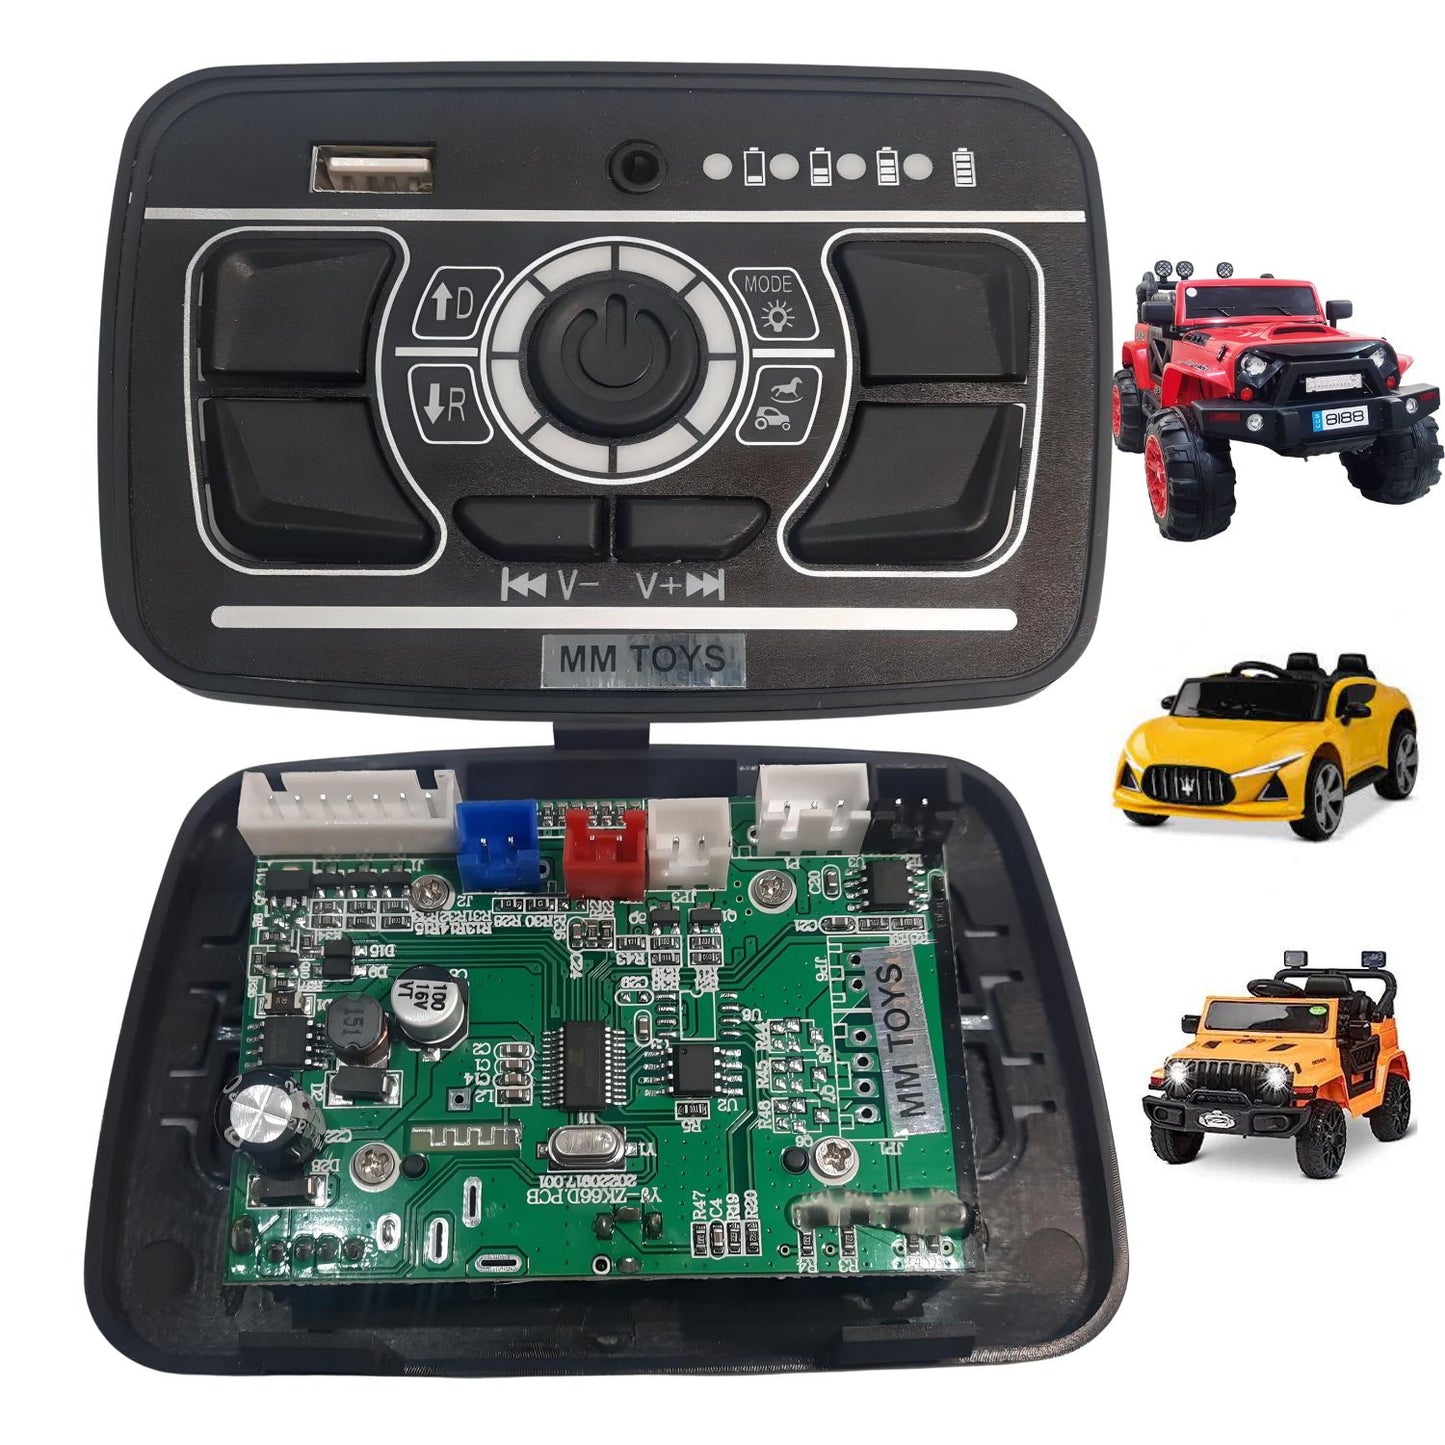 MM TOYS Multifunction Central Motherboard YJ-ZJ66D for Kids Electric Car - Advanced 12V Control System with USB Rideon Replacement Parts Accessories-Black